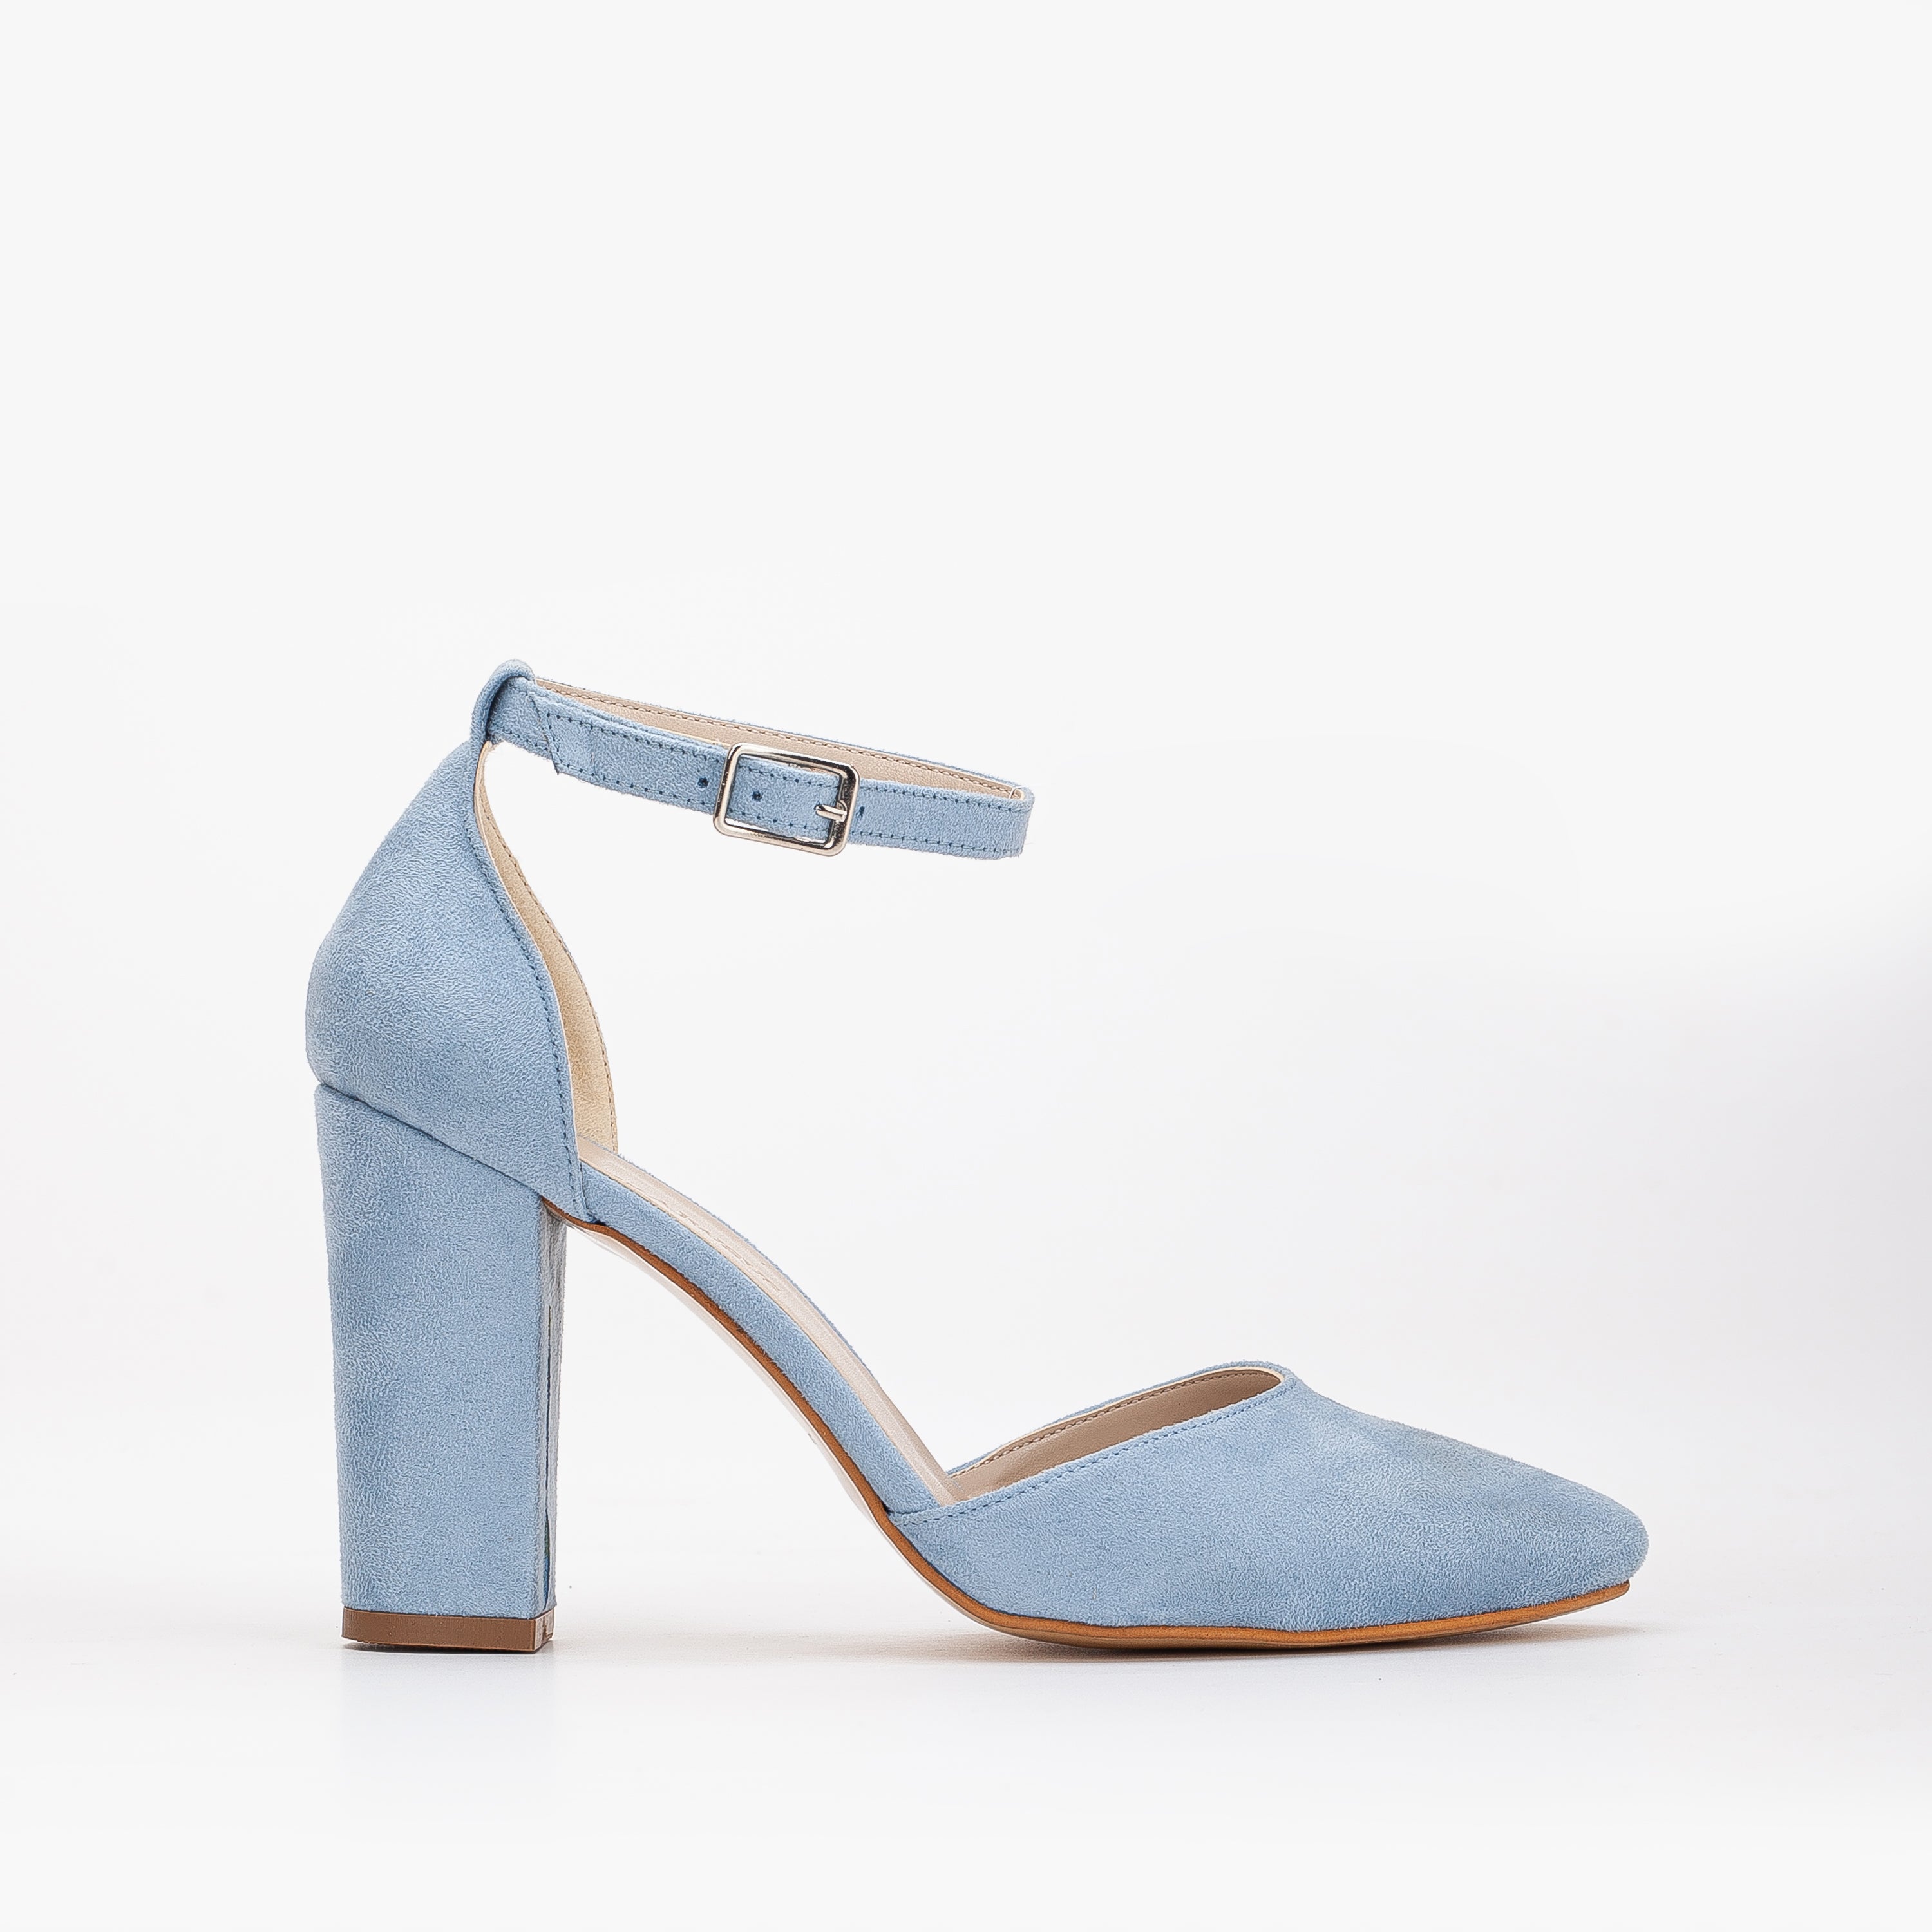 Baby blue closed-toe heels, Elegant sky blue pumps, Formal blue high heels, Classic closed-toe blue shoes, Chic baby blue footwear, Sophisticated bridal heels, Stylish closed-toe blue heels, Trendy baby blue pumps, Fashionable high heels in baby blue, Versatile closed-toe blue footwear